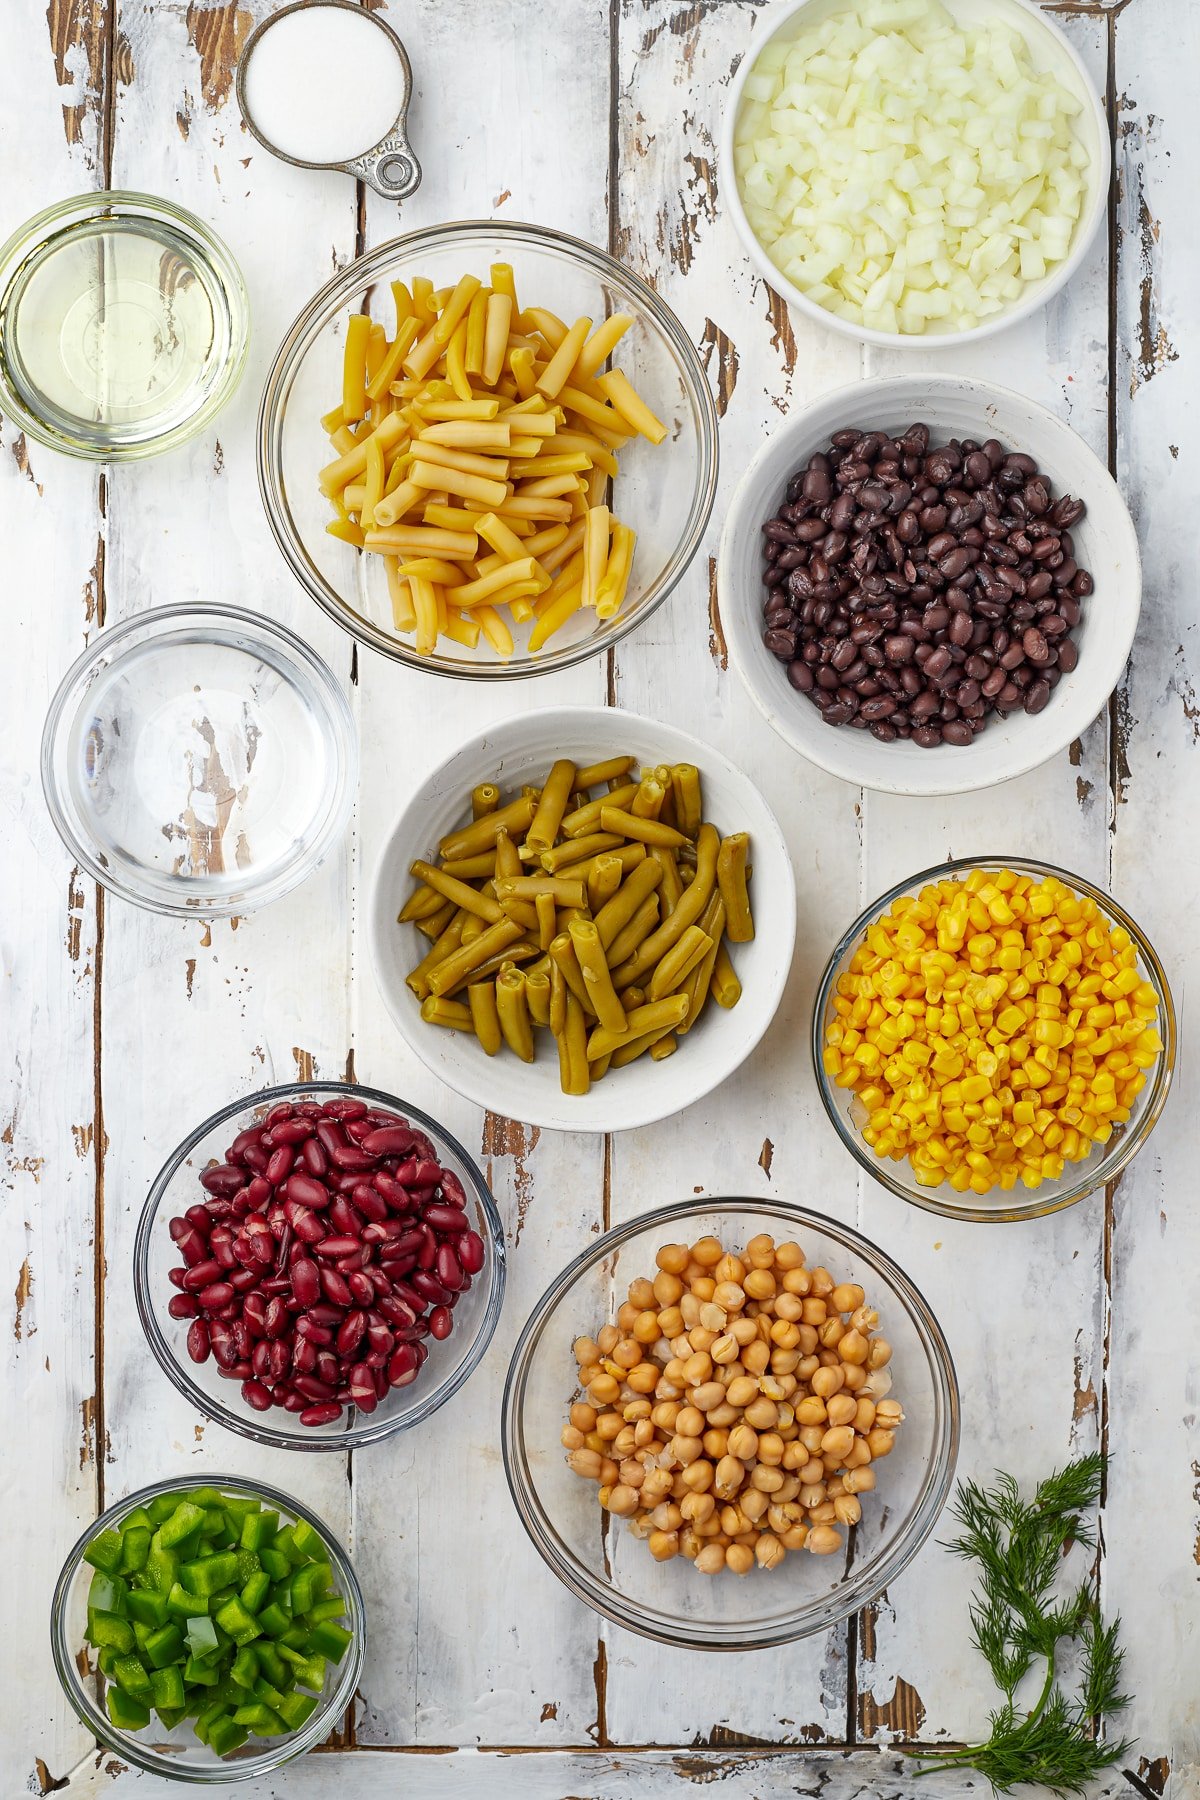 Overhead image of ingredients needed to make 5 bean salad on a white wooden table top